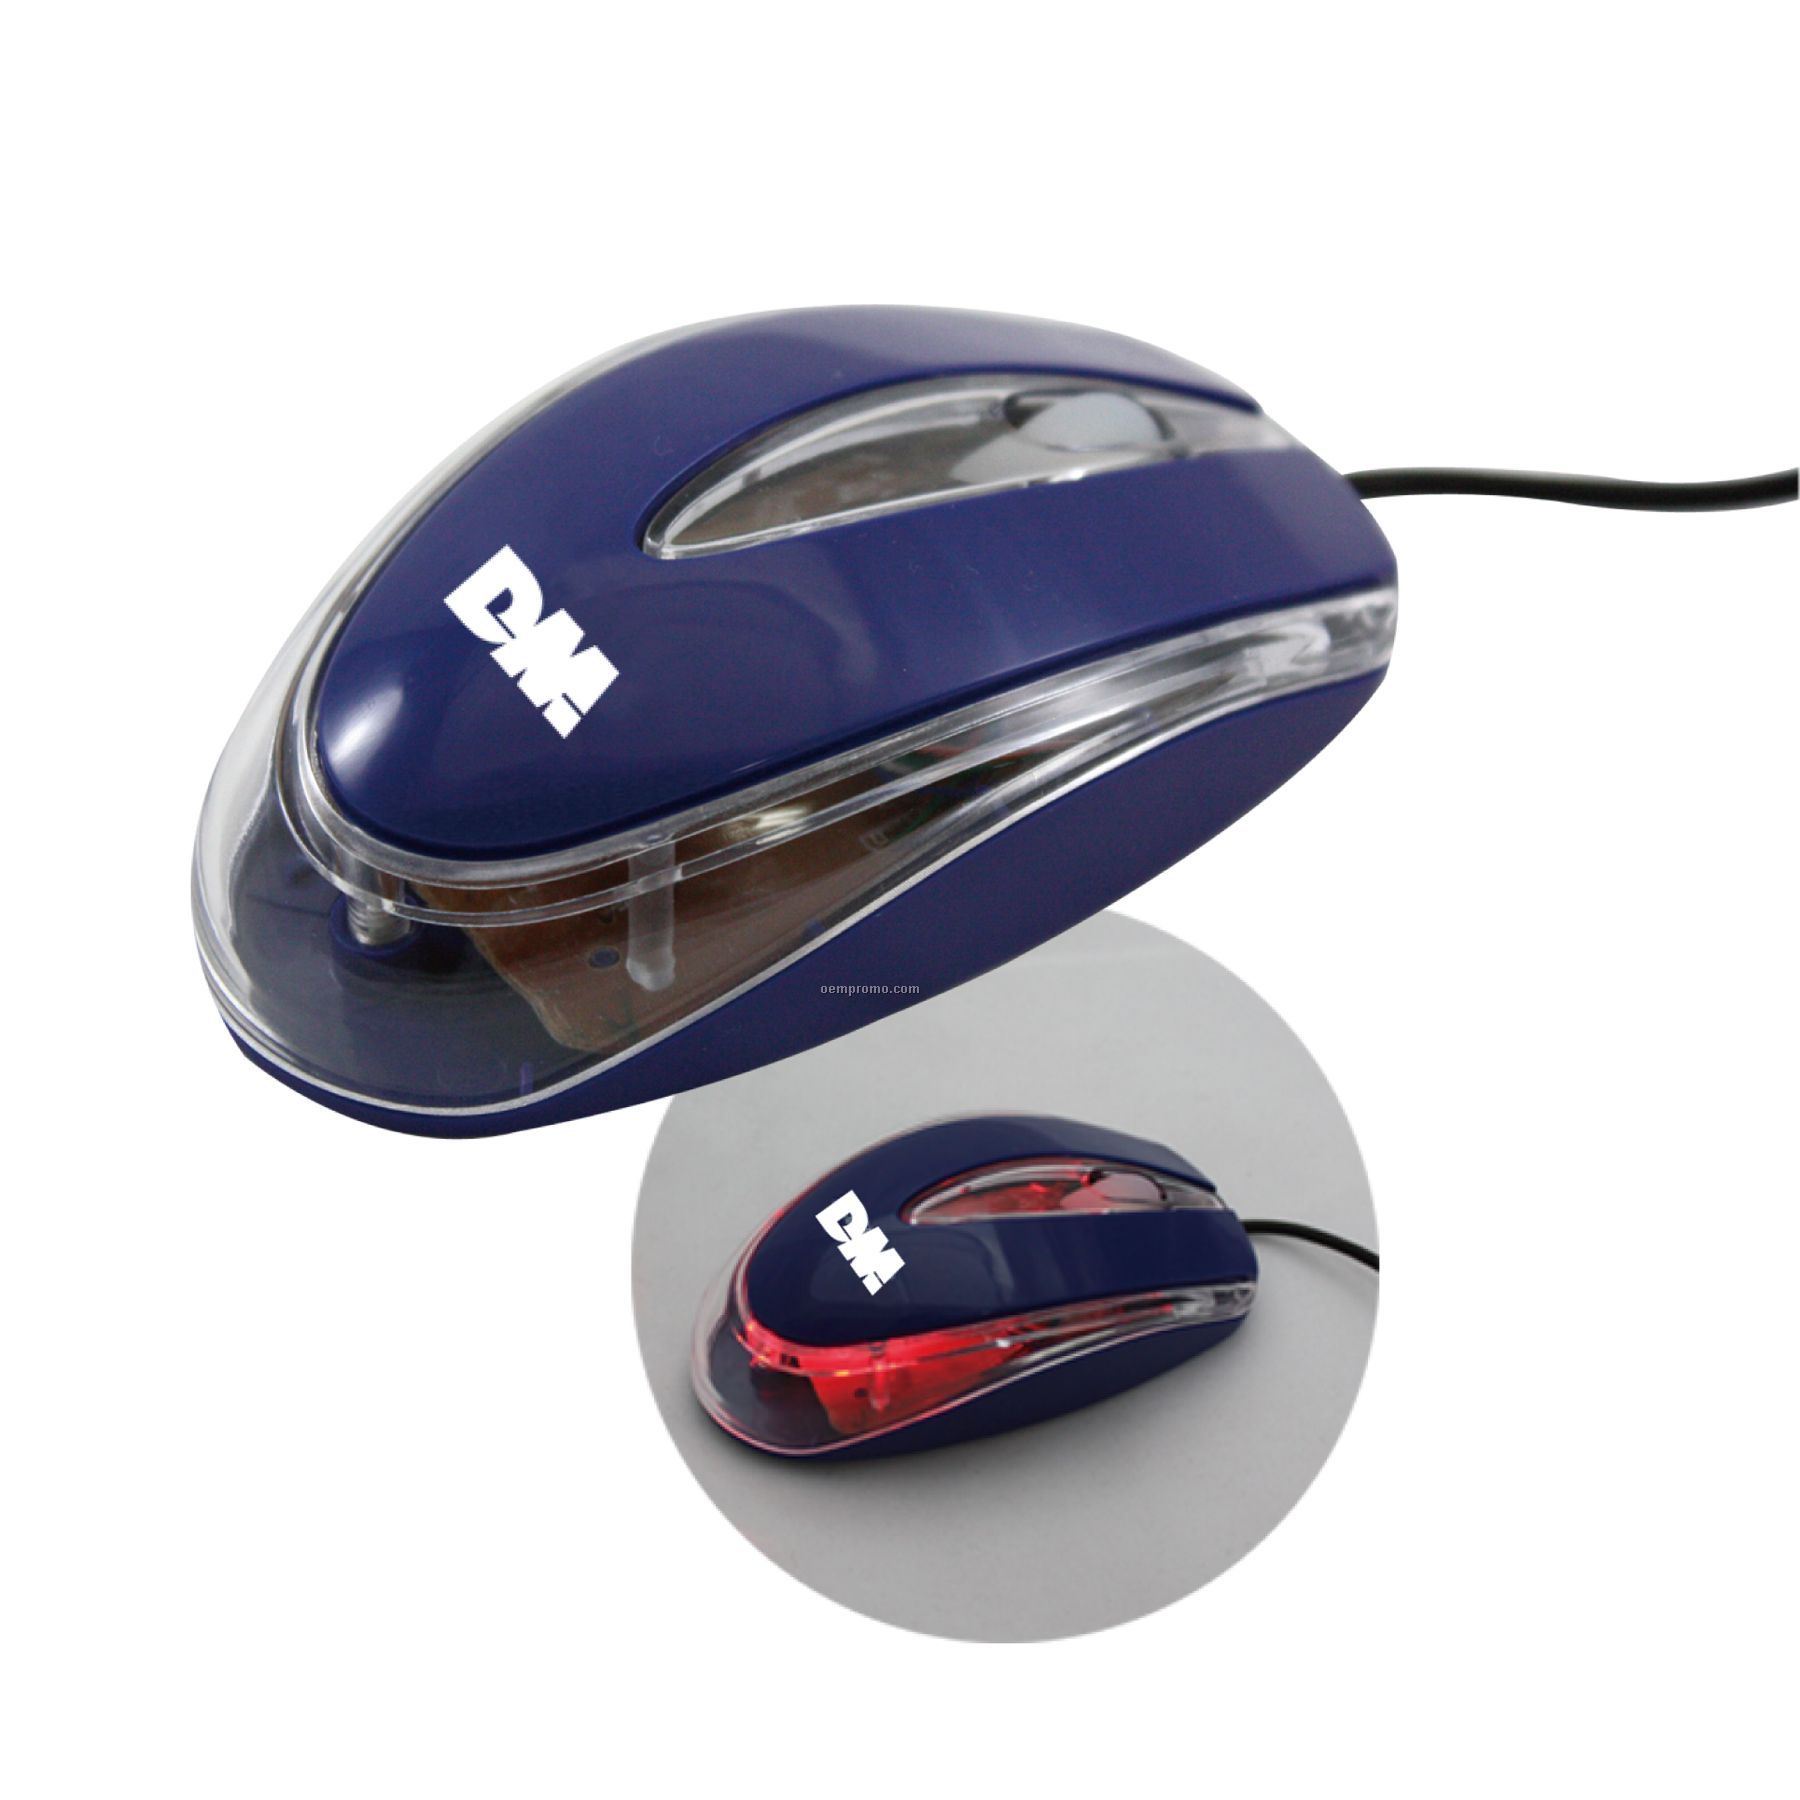 Light Up Optical Mouse